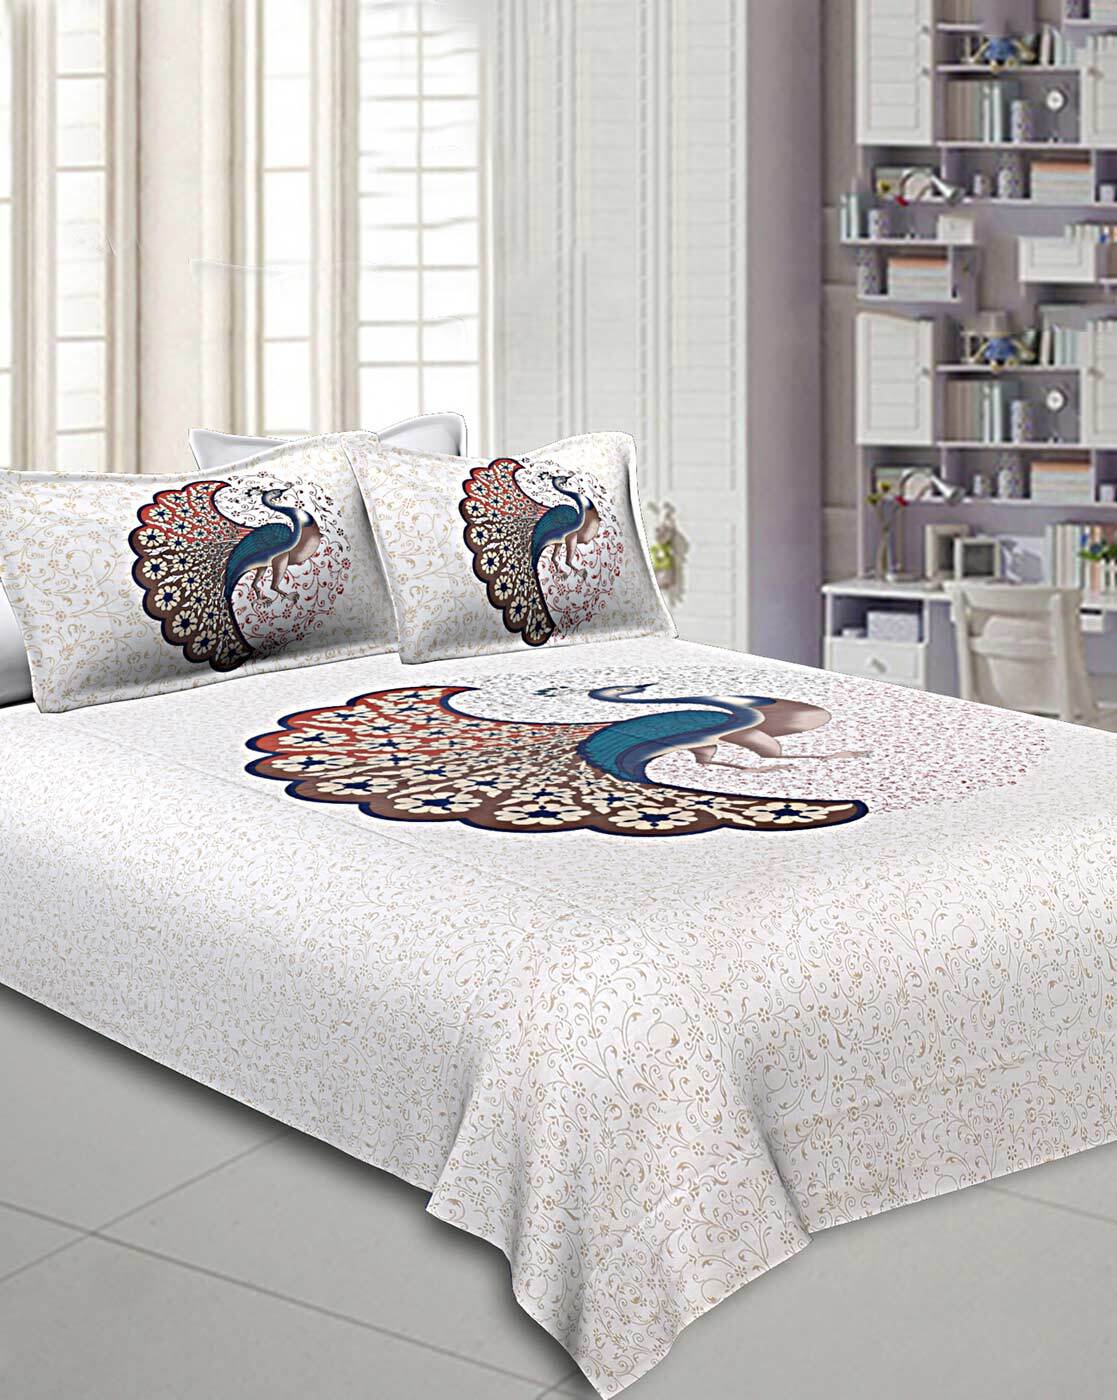 Draw designs for bed sheets by Priyankav9 | Fiverr